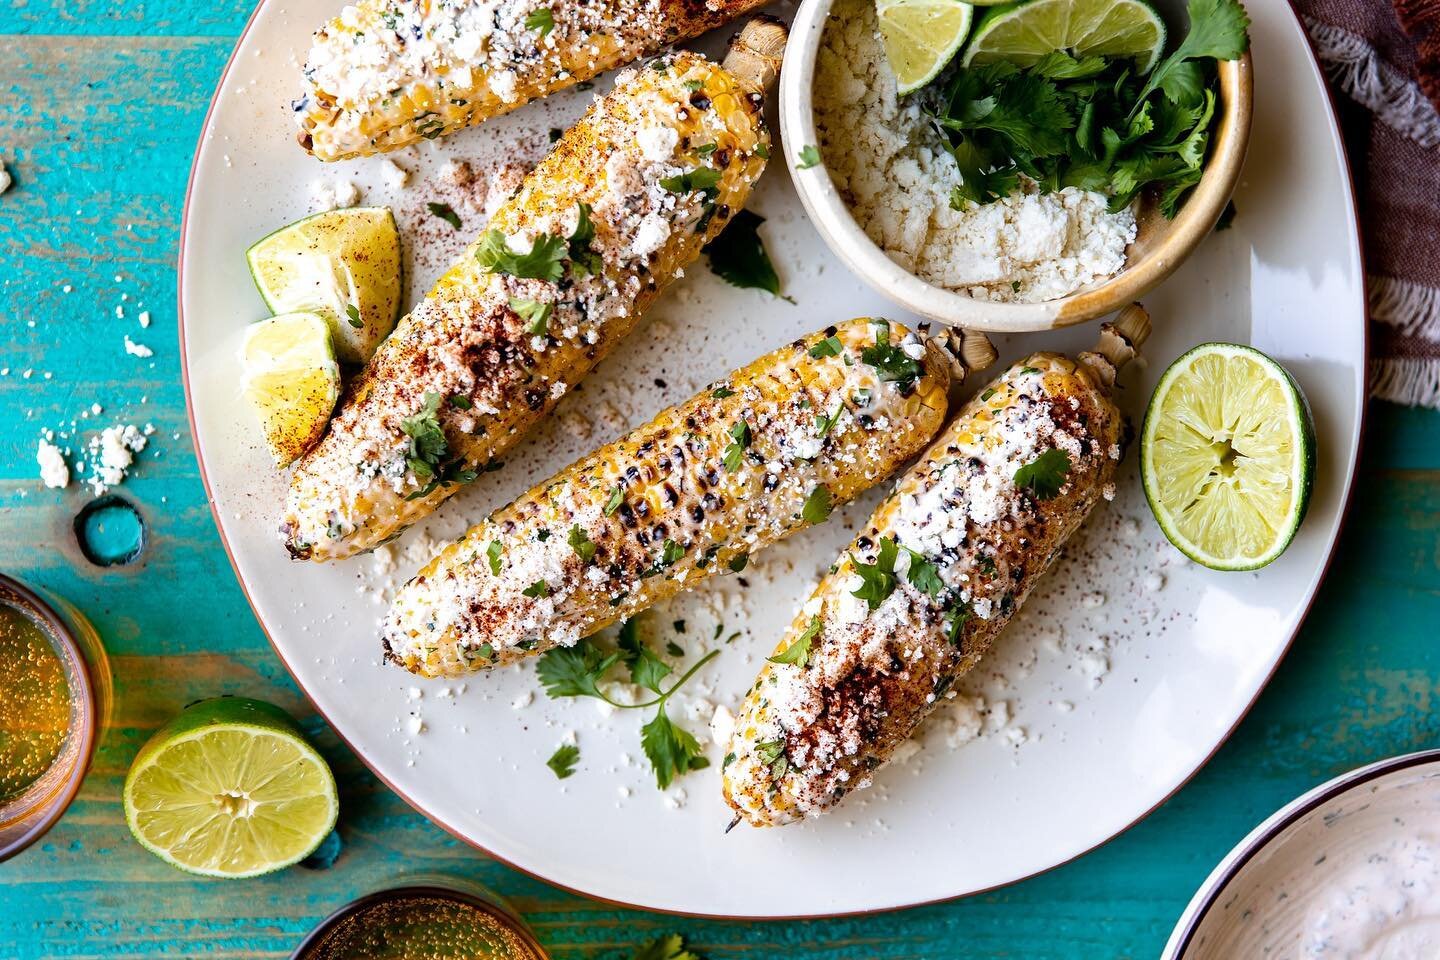 Enjoy the flavors of summer with this sweet and spicy Mexican Street Corn🌽🍋💛